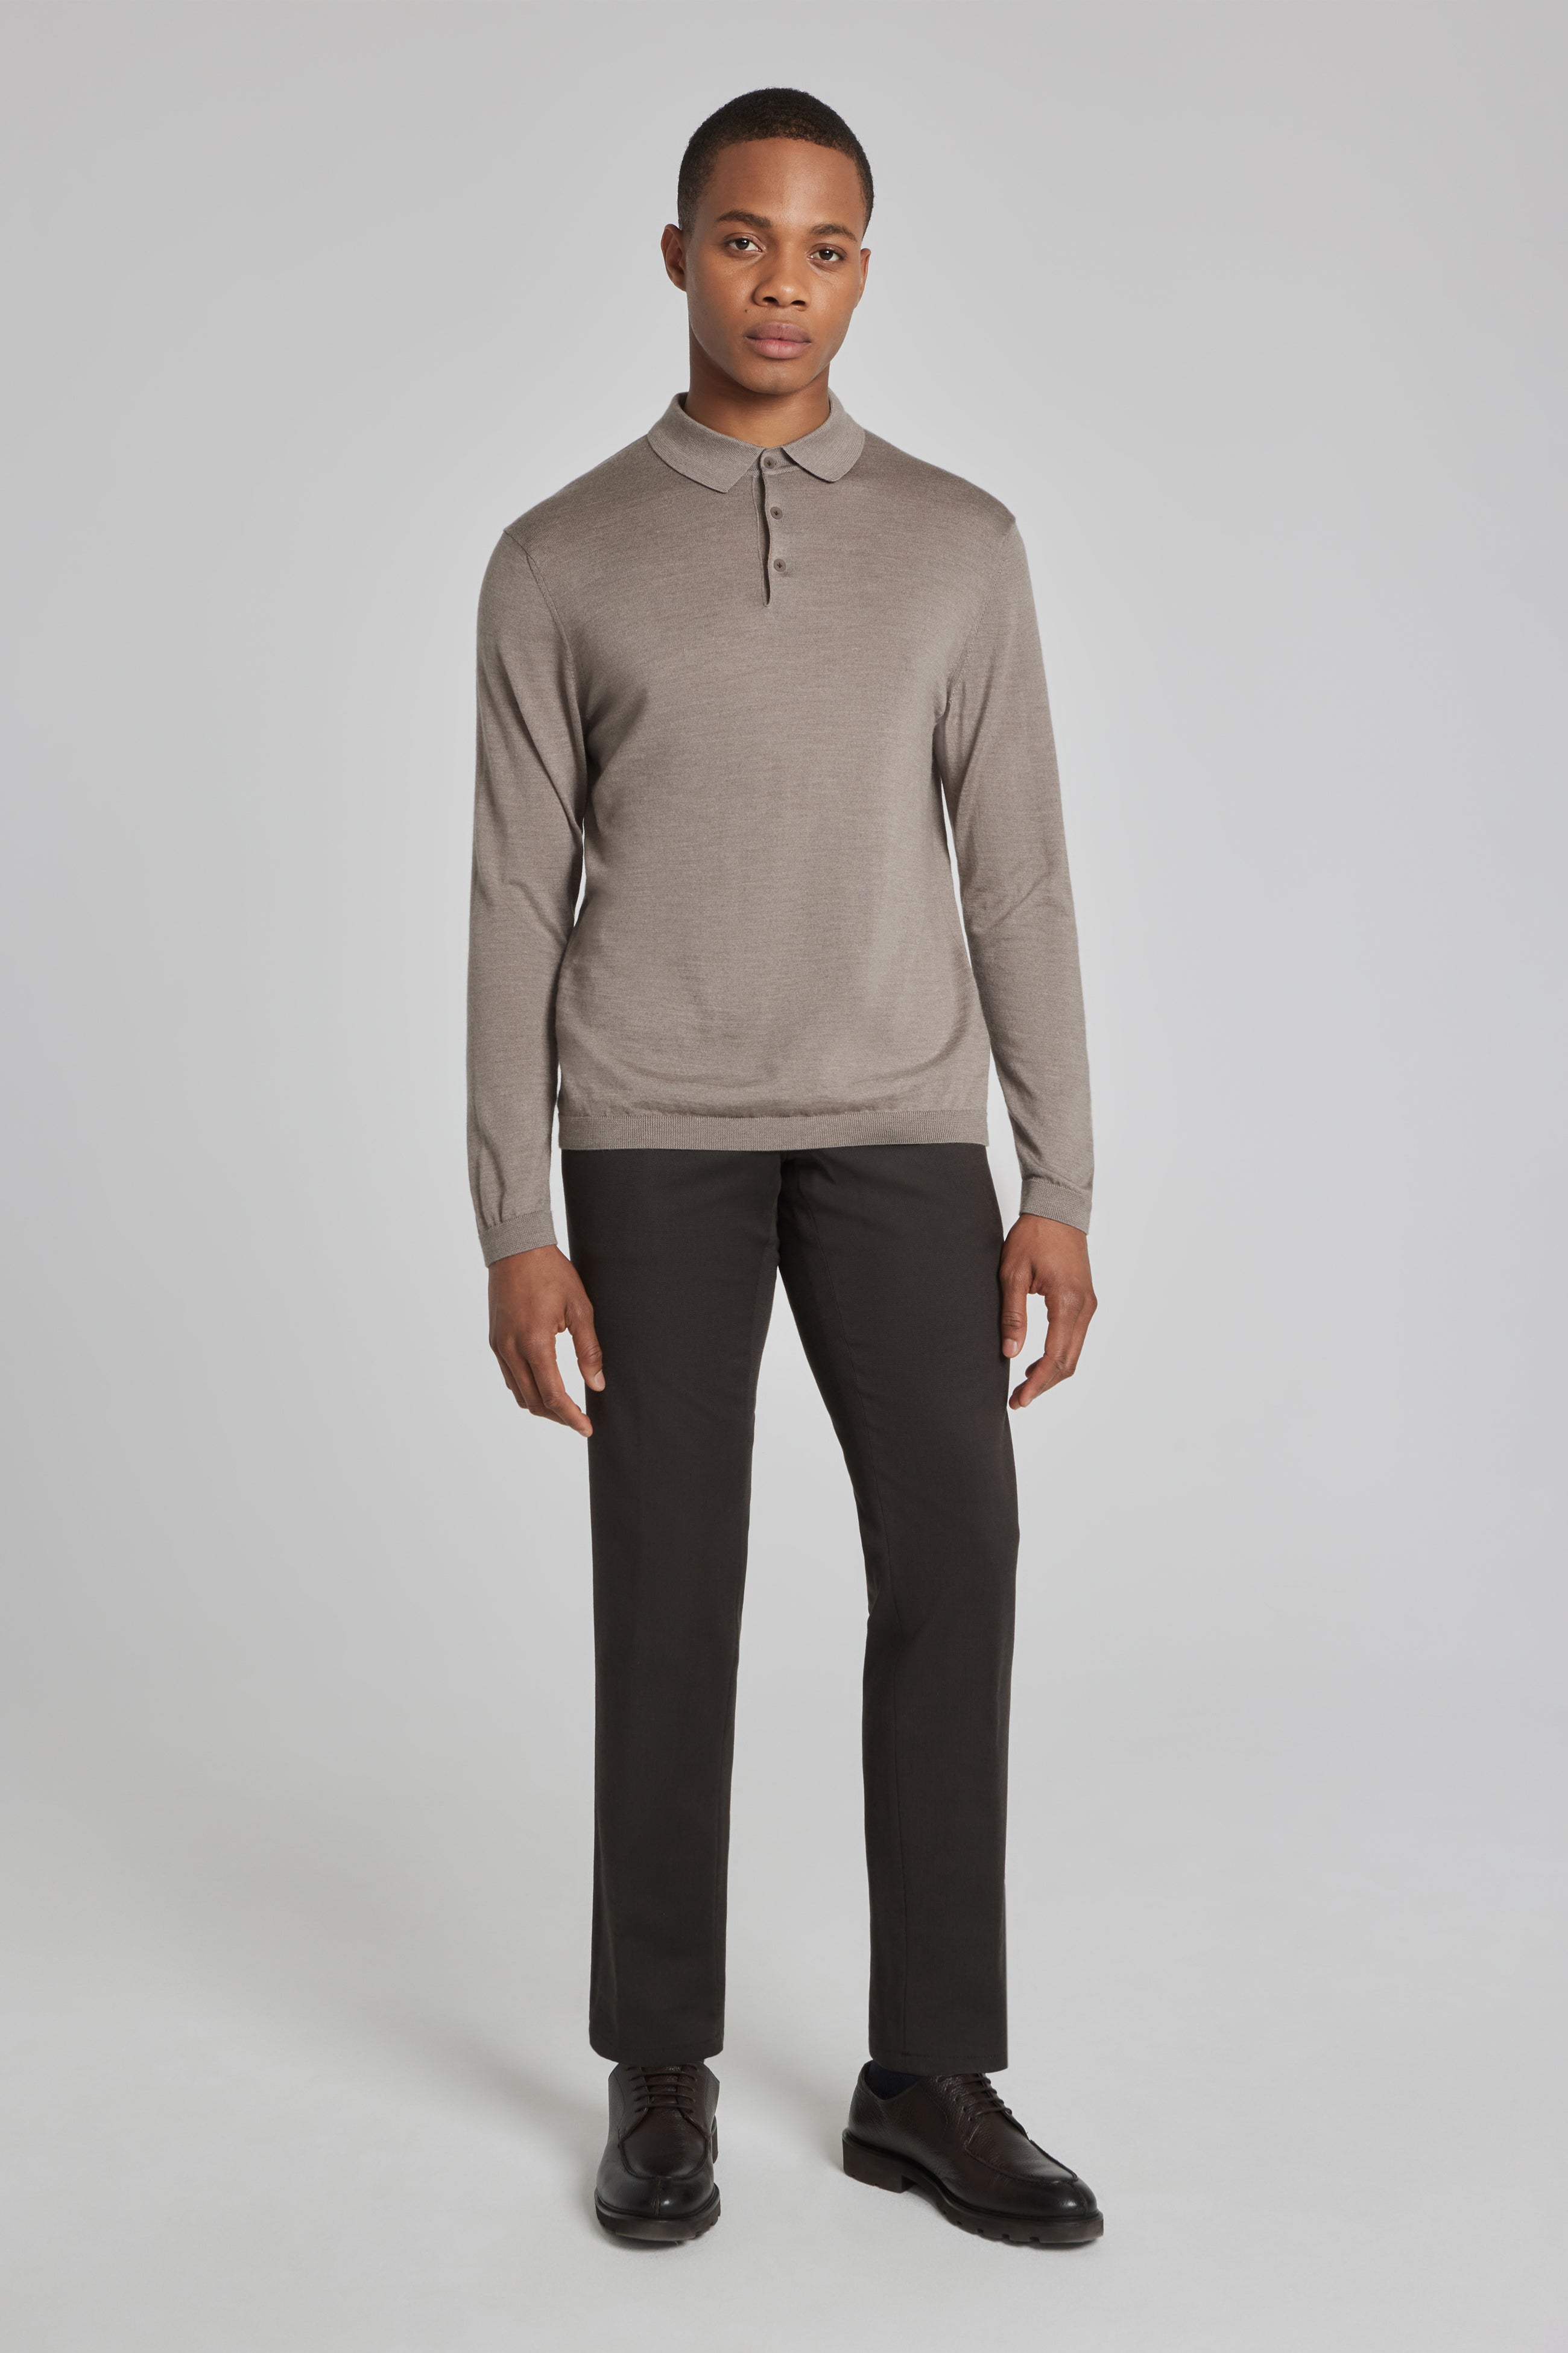 Alt view 2 Redfern Wool, Silk and Cashmere Long Sleeve Polo in Tan